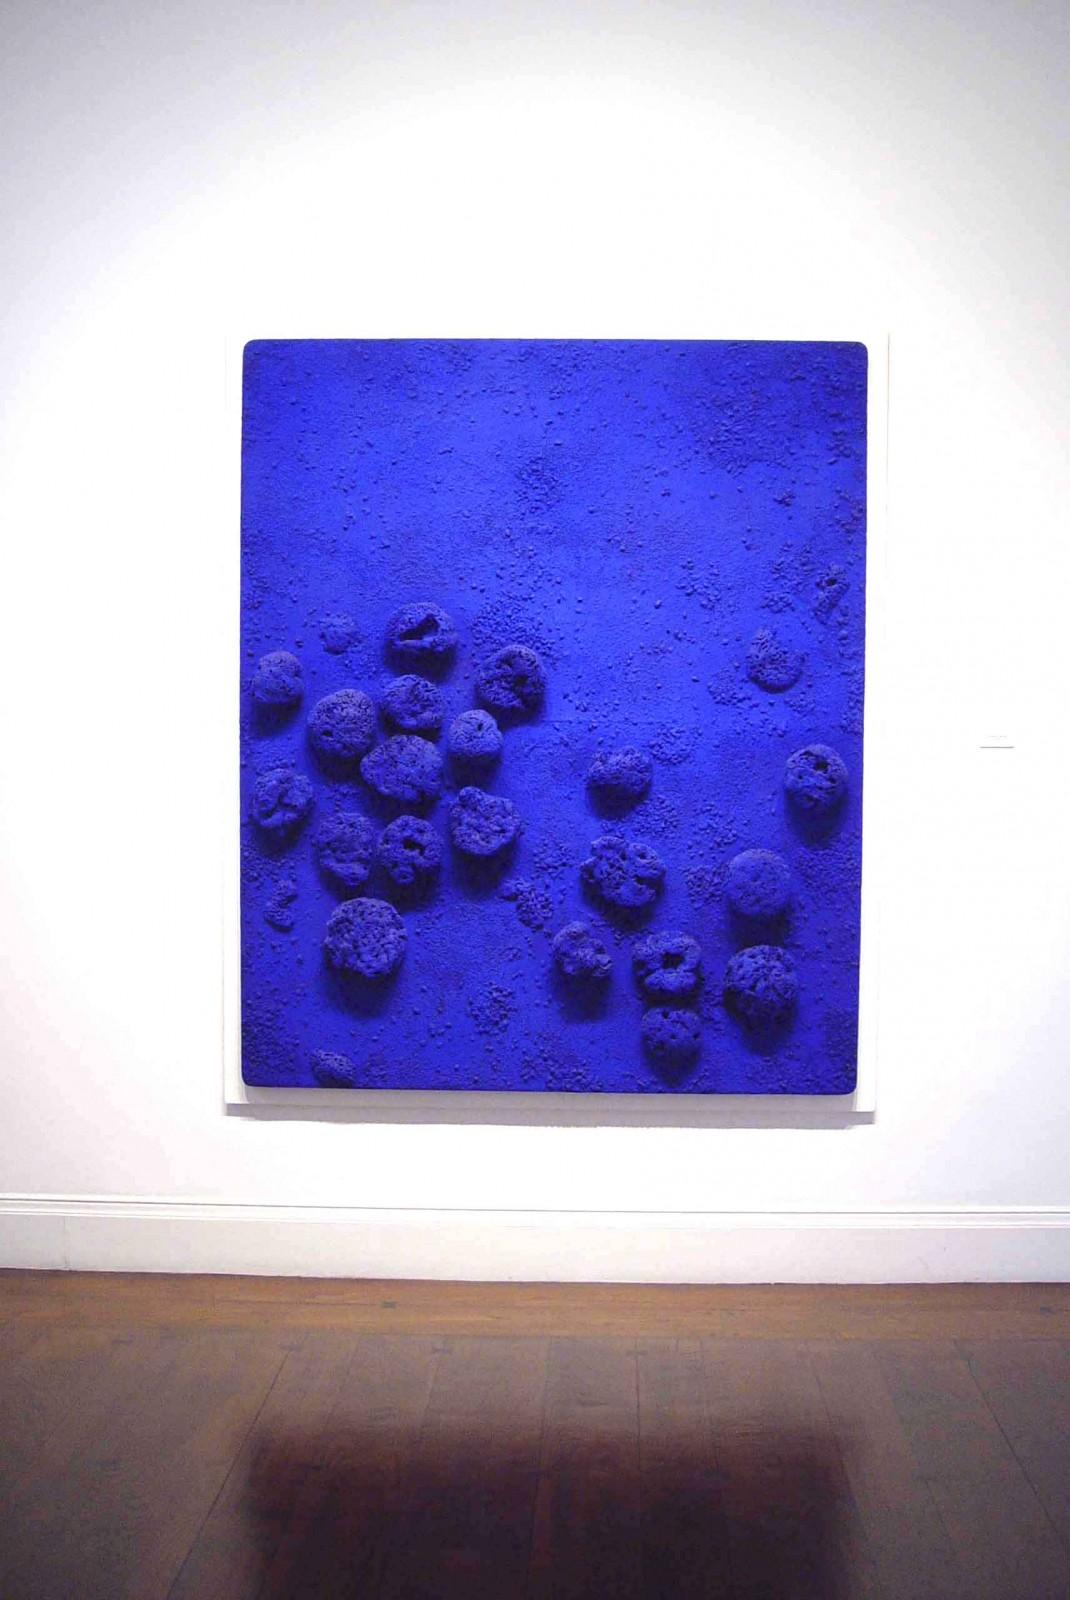 View of the exhibition, "Yves Klein: A Career Survey", L & M Arts, 2005